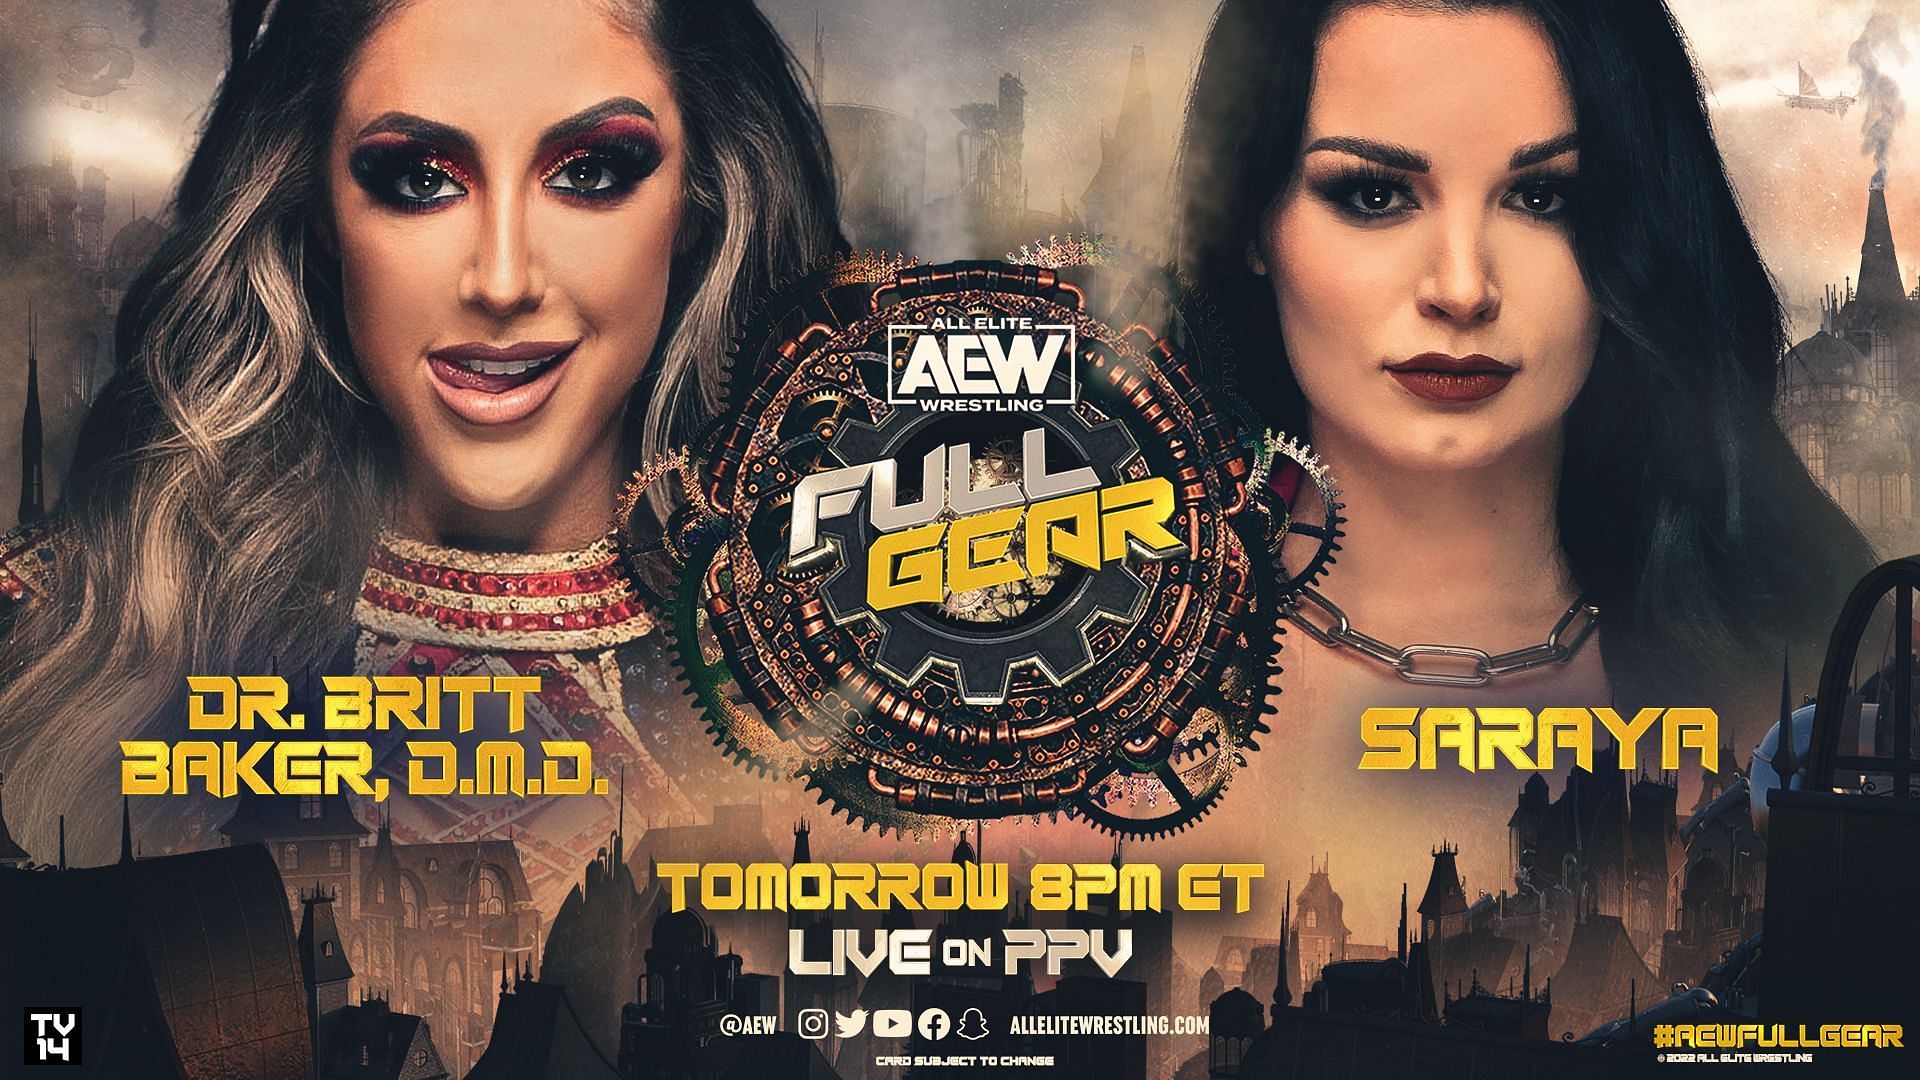 Saraya wrestles for the first time in an AEW ring against Britt Baker